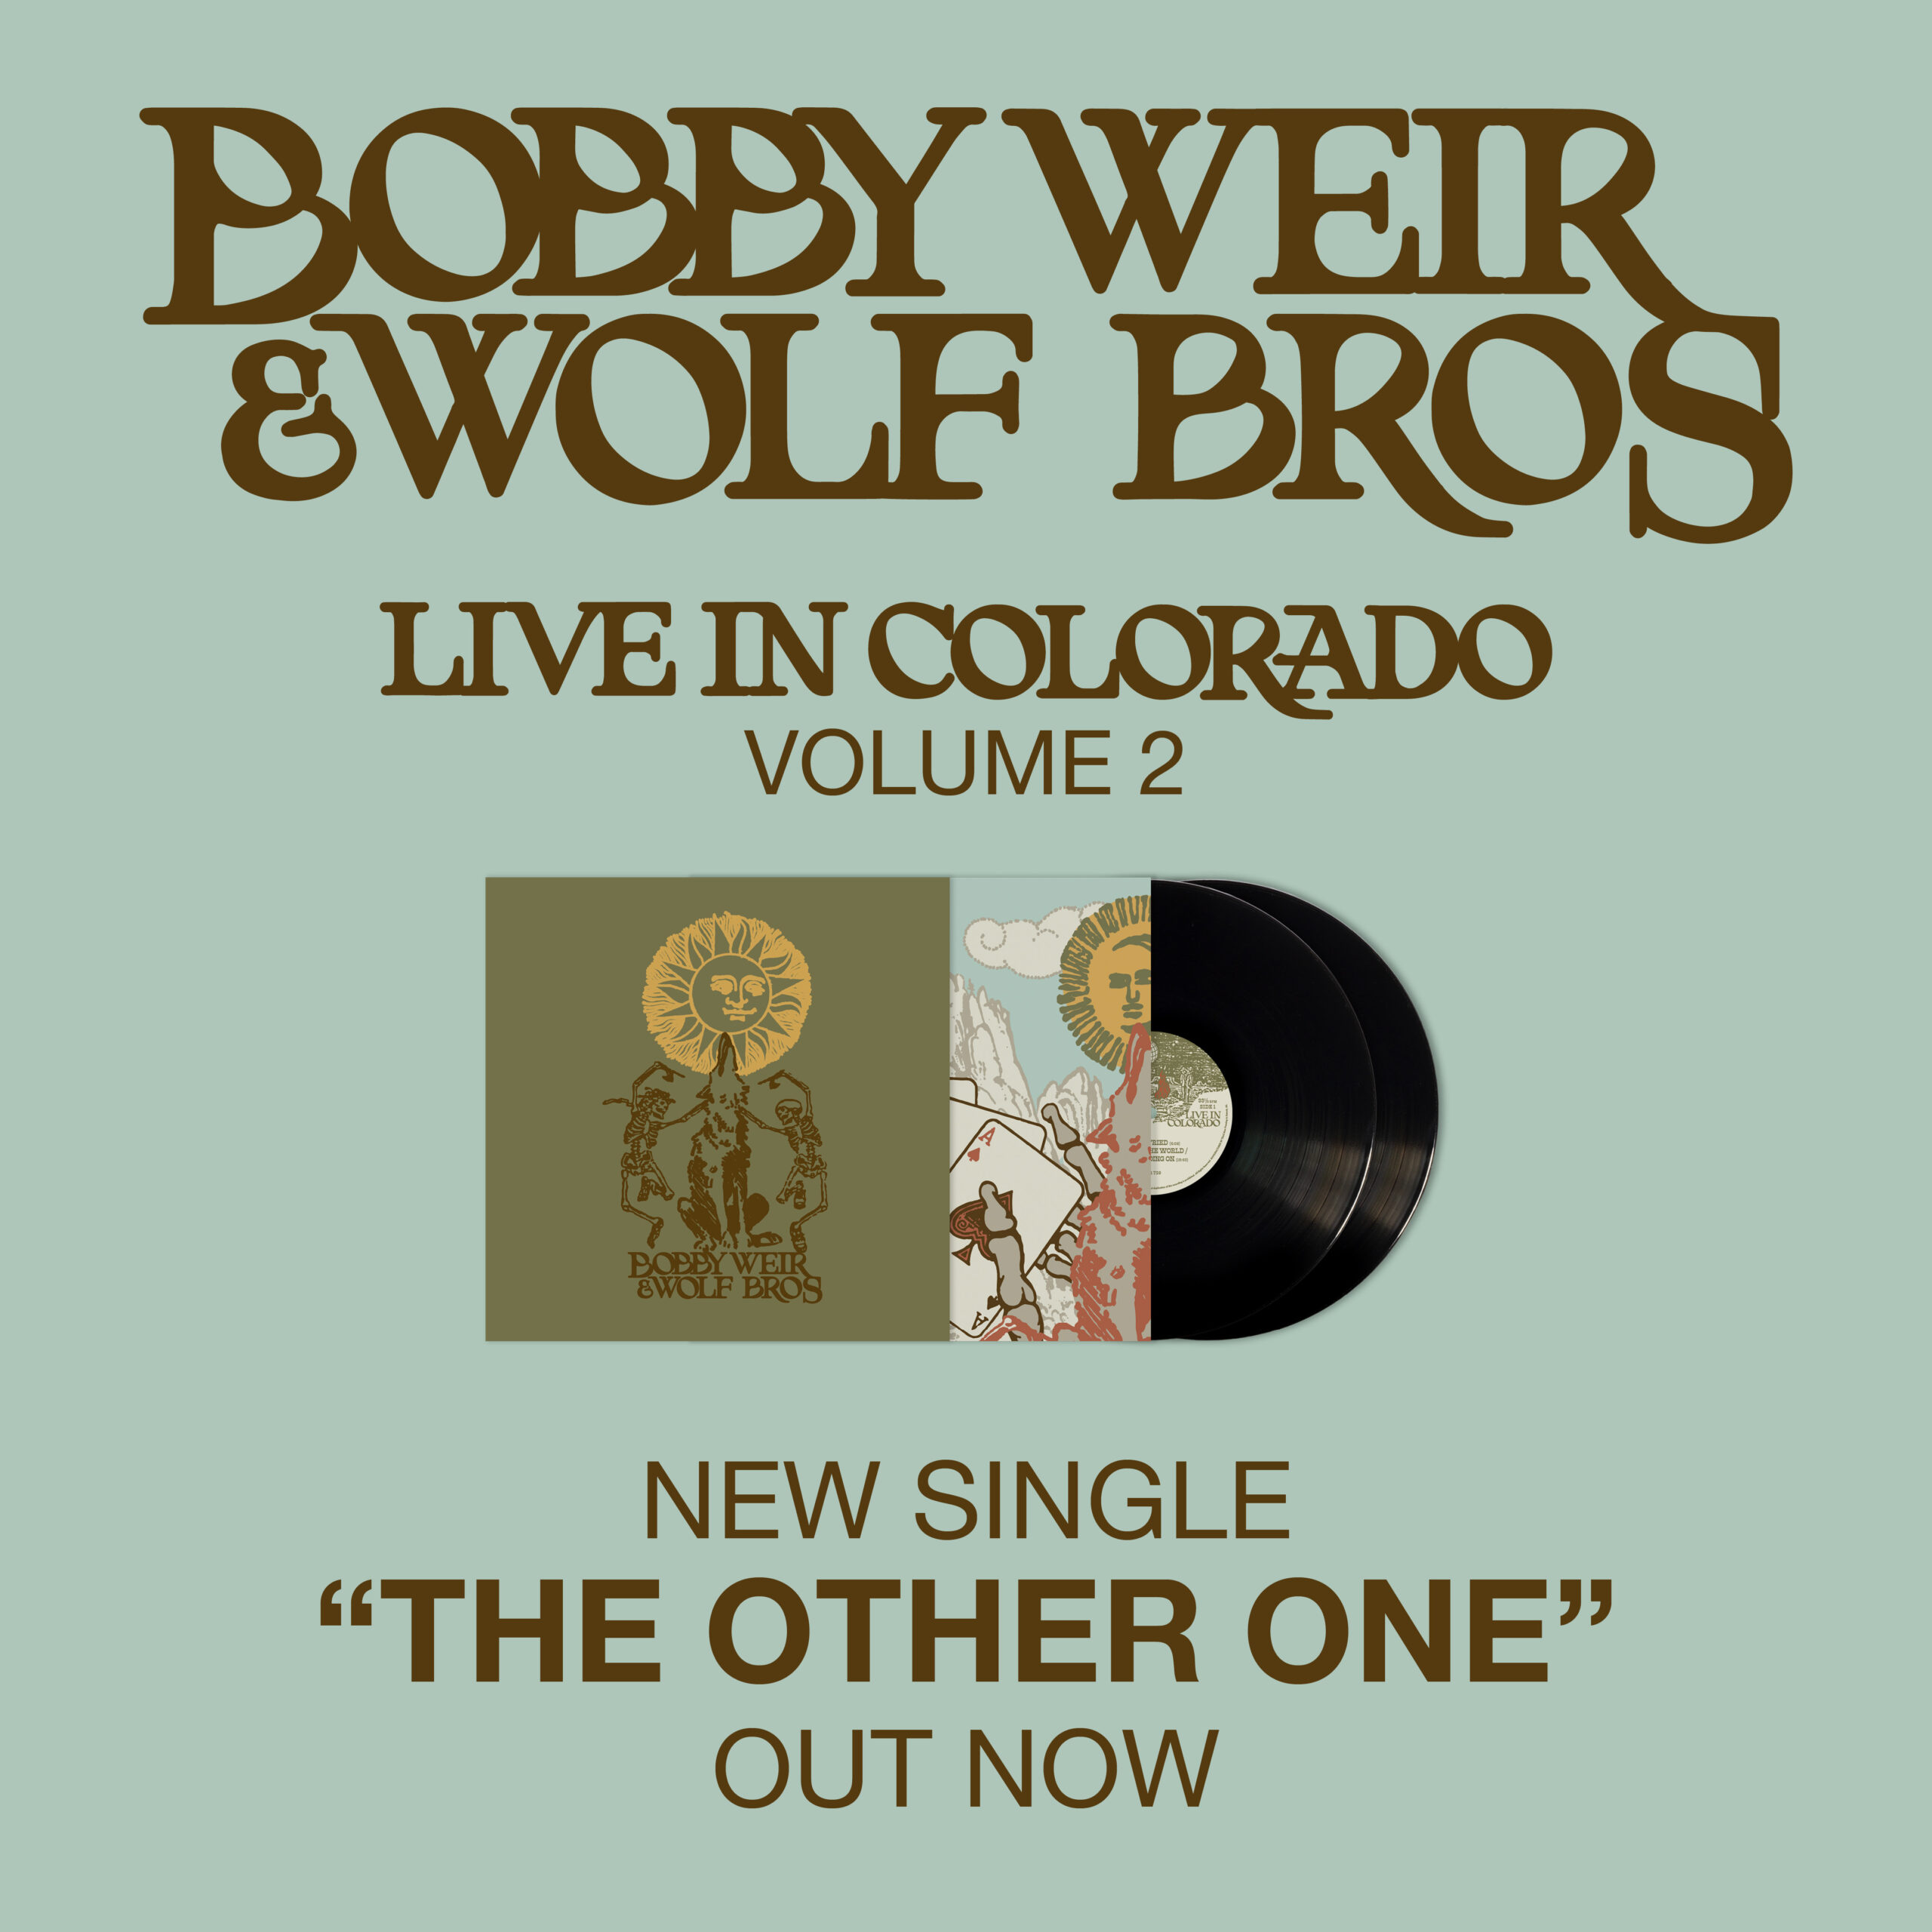 Bobby Weir & Wolf Bros Share “The Other One”